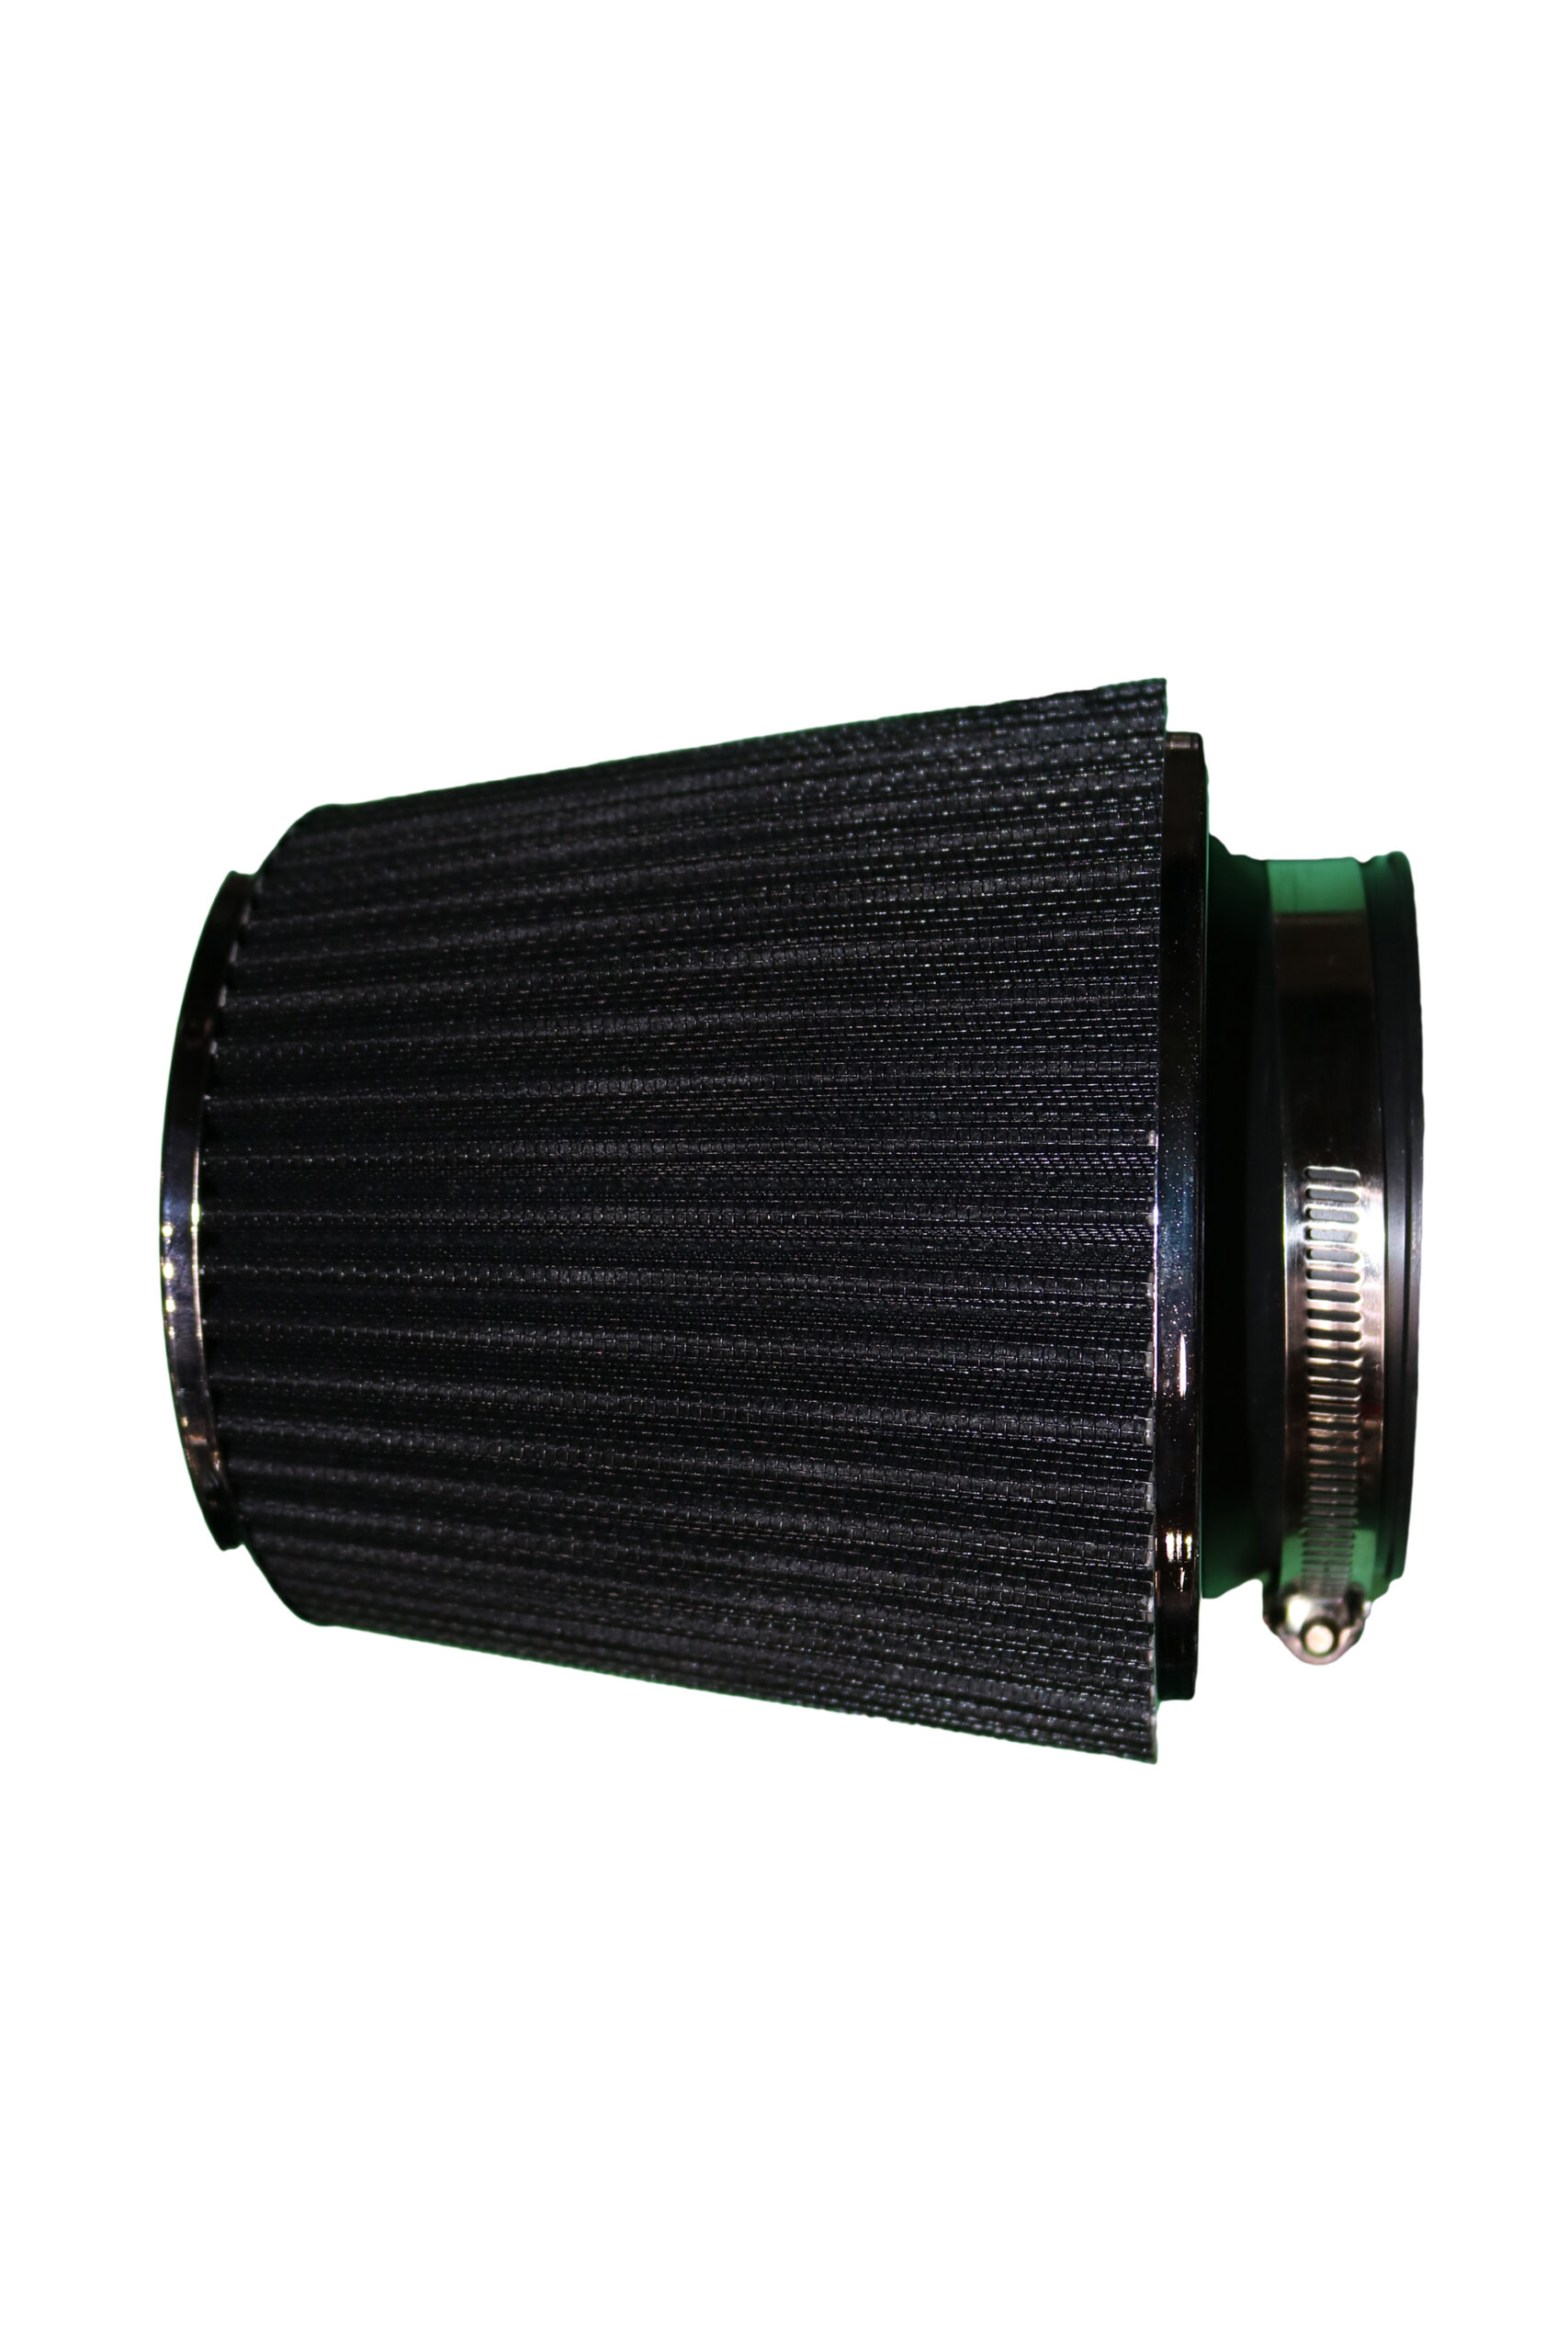 C5 Corvette 1997-2000 Vortex Rammer Cleanable Replacement Air Intake Filter